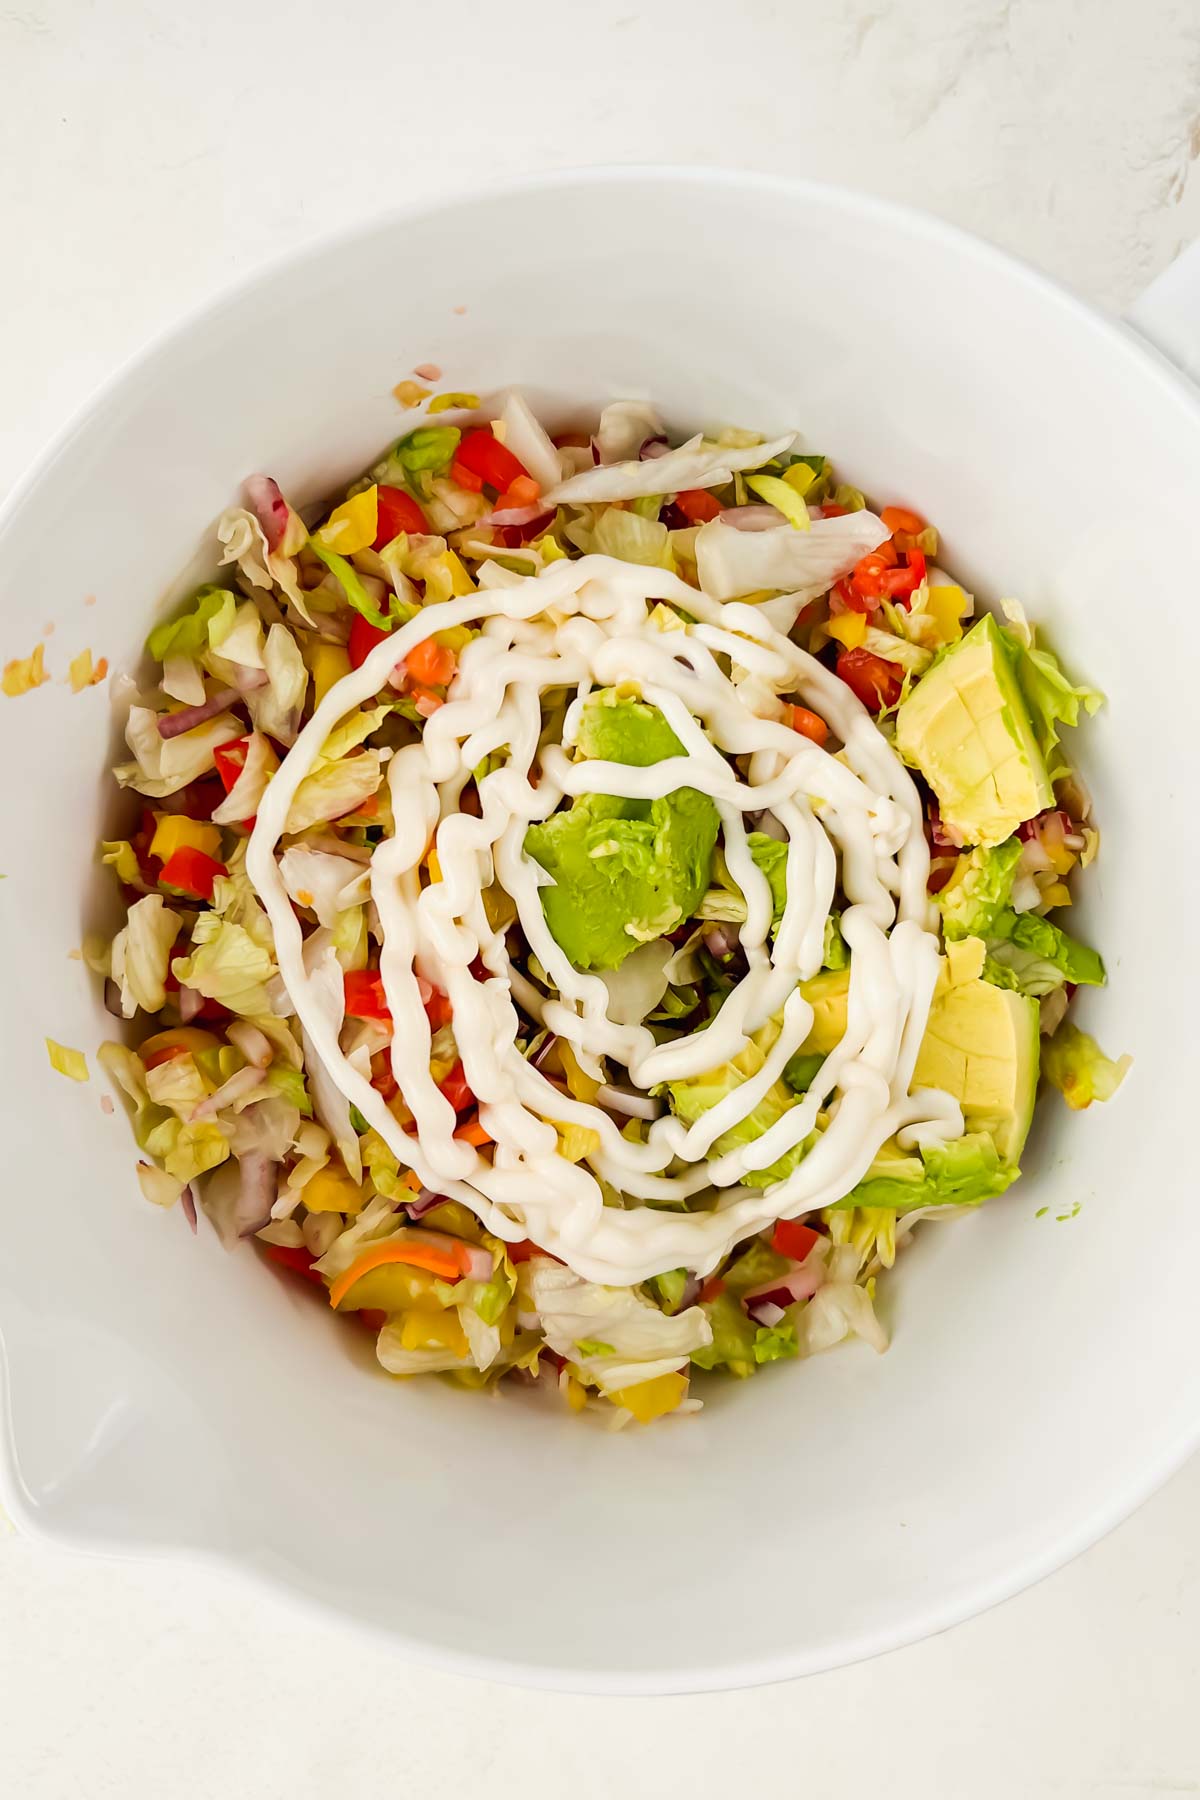 chopped grinder salad ingredients in white bowl topped with mayo.